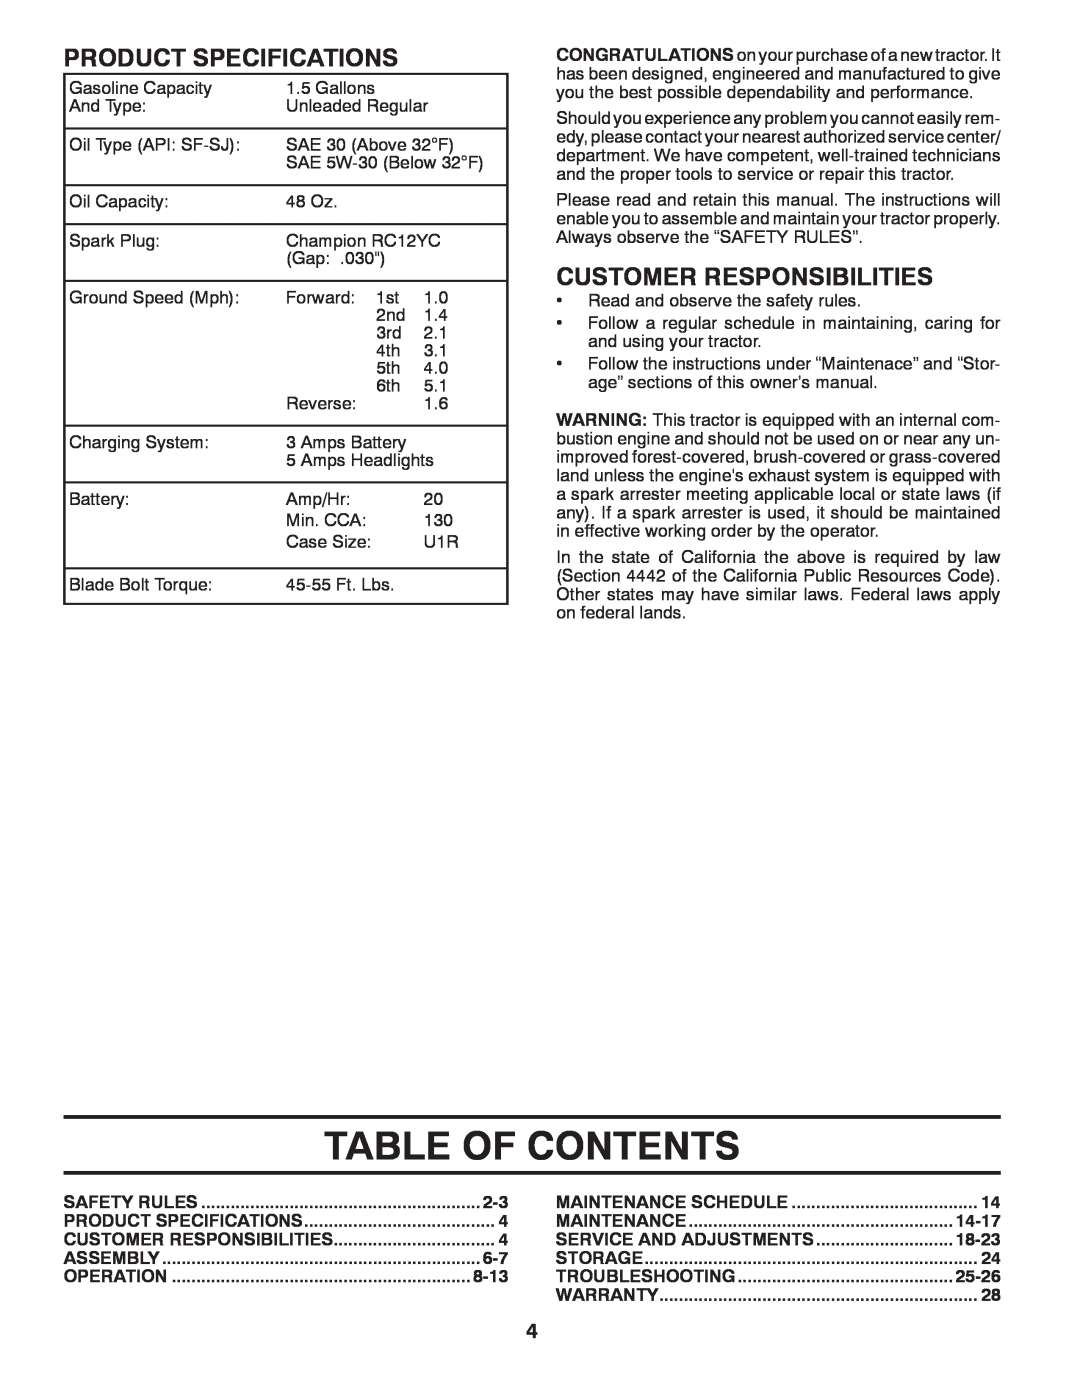 Poulan PXT12530 manual Table Of Contents, Product Specifications, Customer Responsibilities 